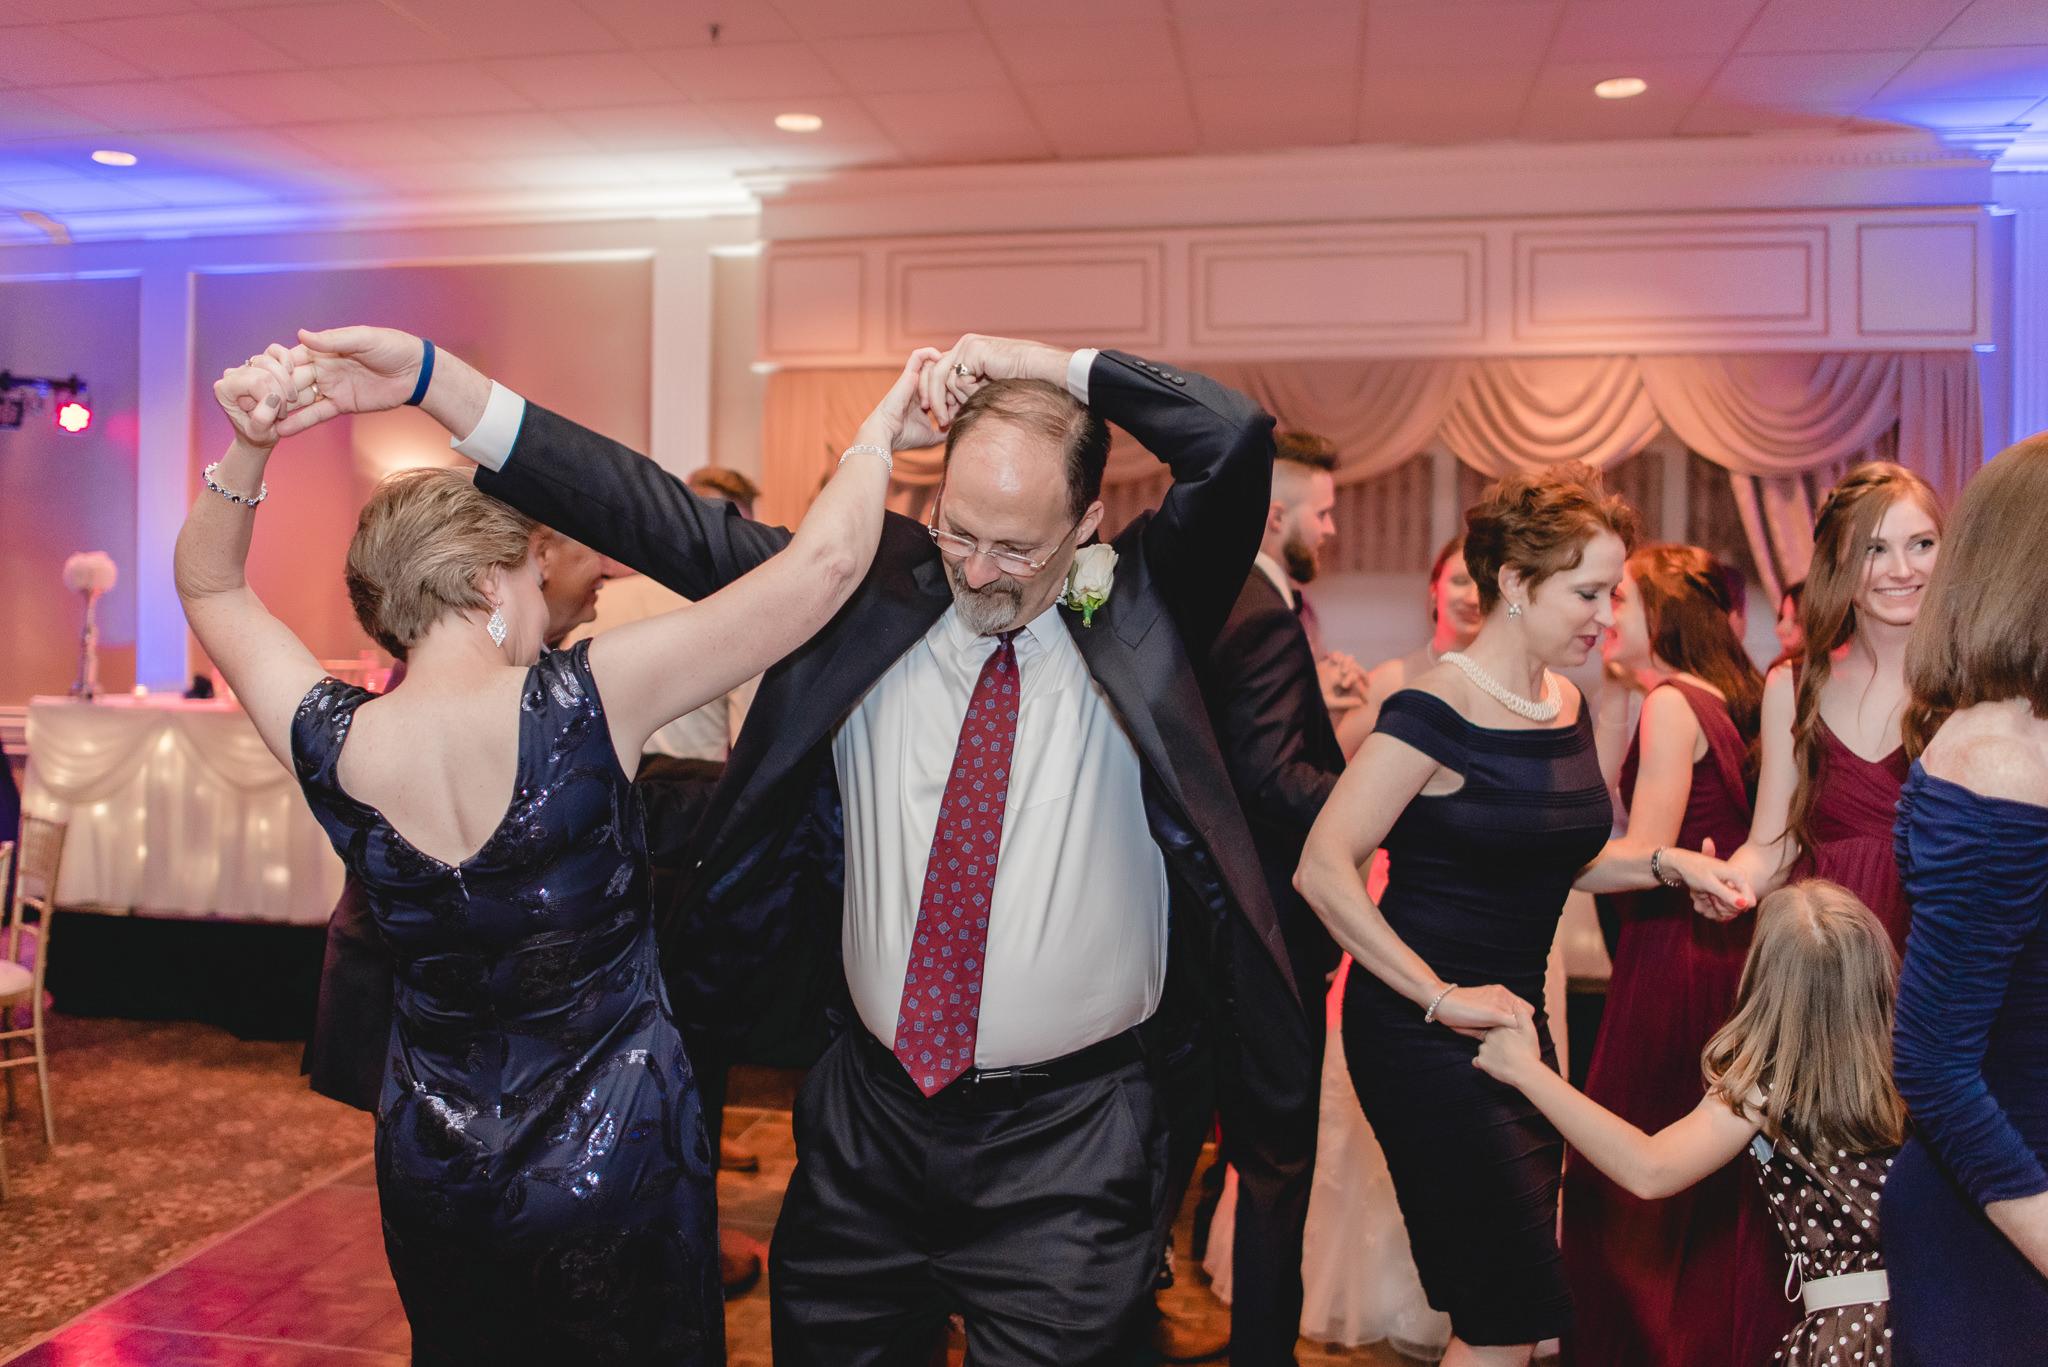 Parents of the groom dance at their son's wedding reception at the Chadwick